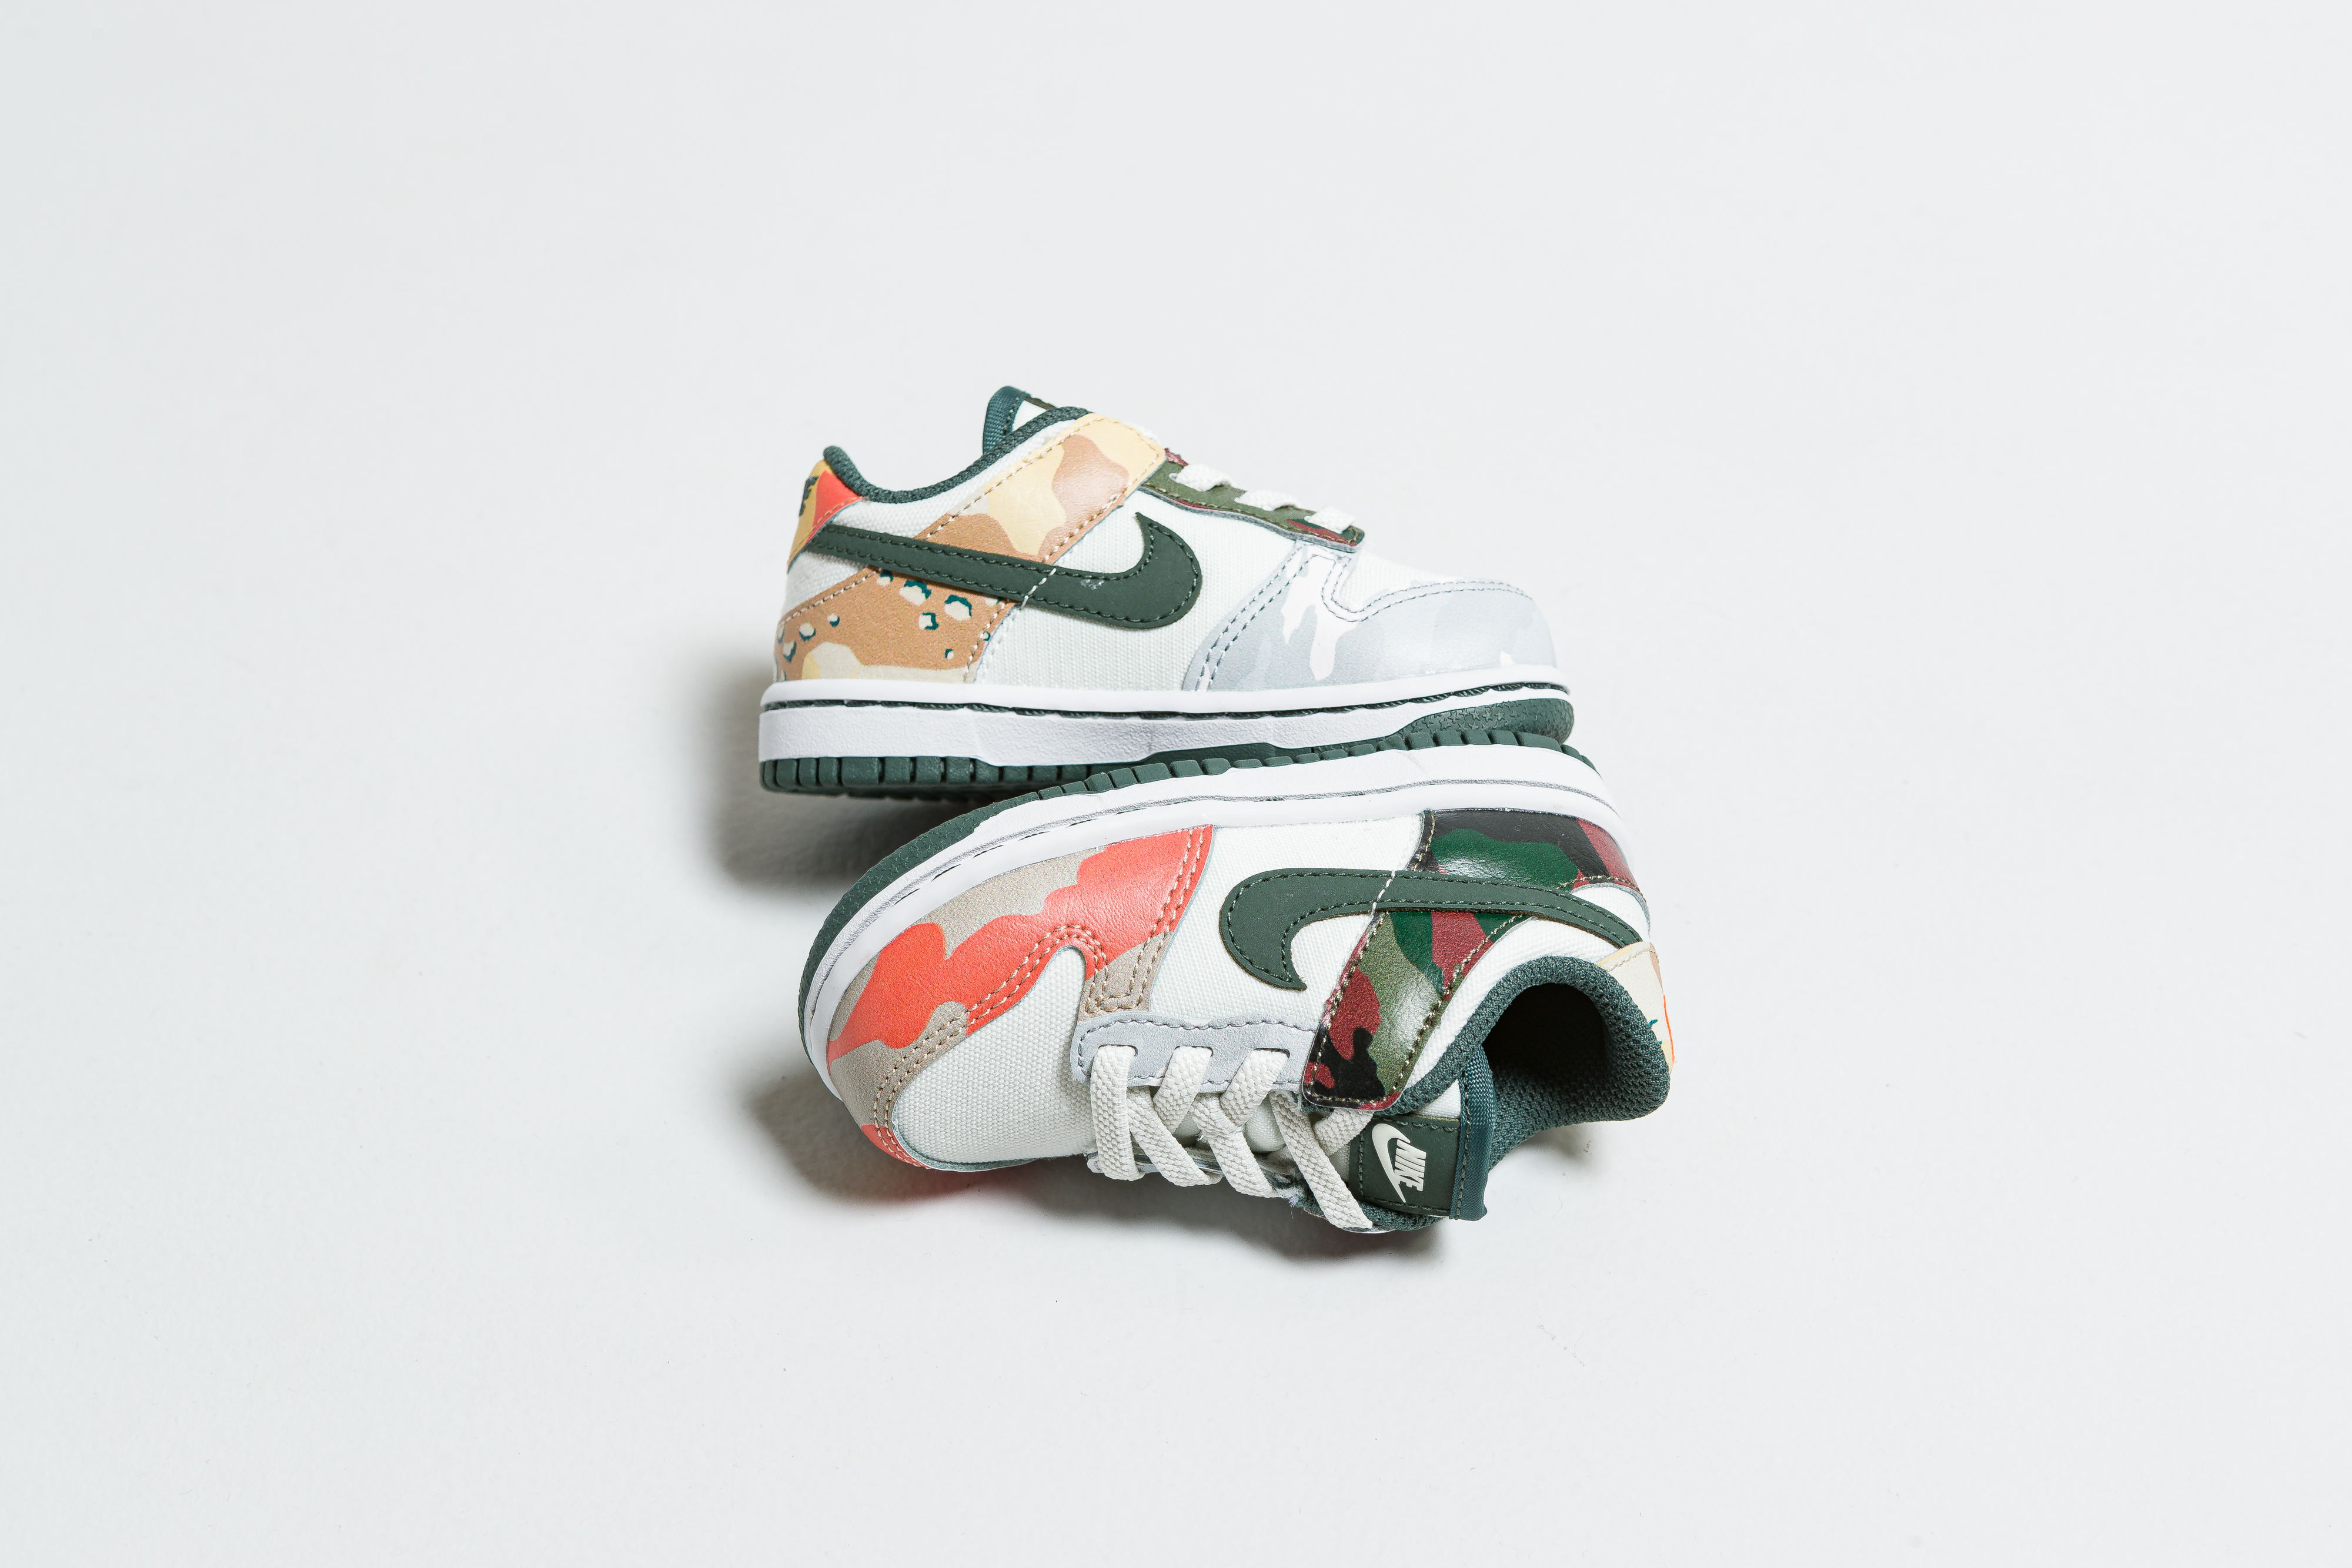 Nike - Dunk Low SE (TDE) - Sail/Vintage Green - Up There